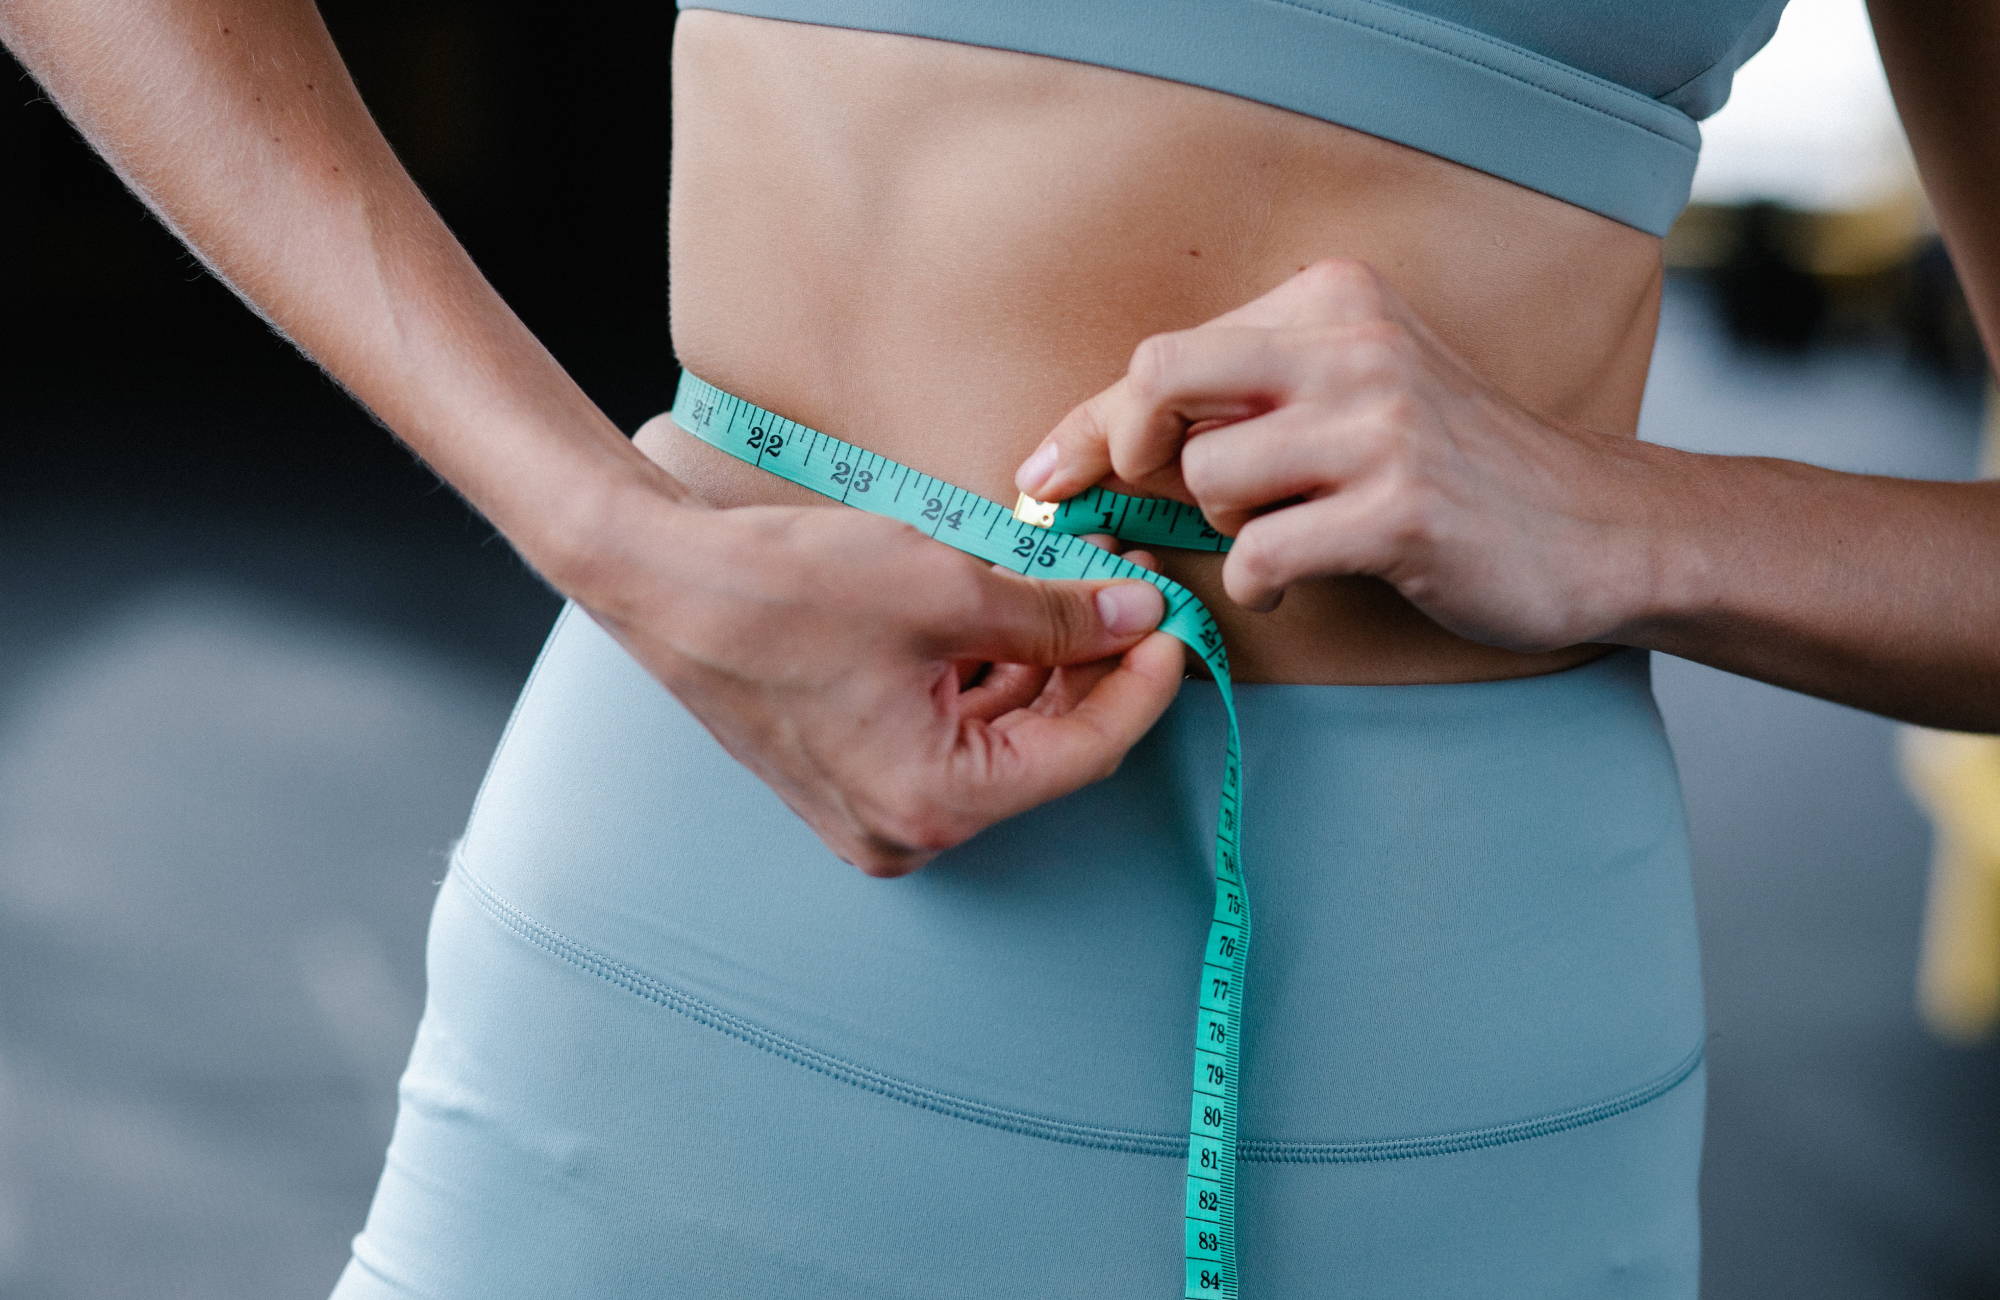 A woman wearing blue yoga pants and a matching sports bra measuring her waist with a teal measuring tape